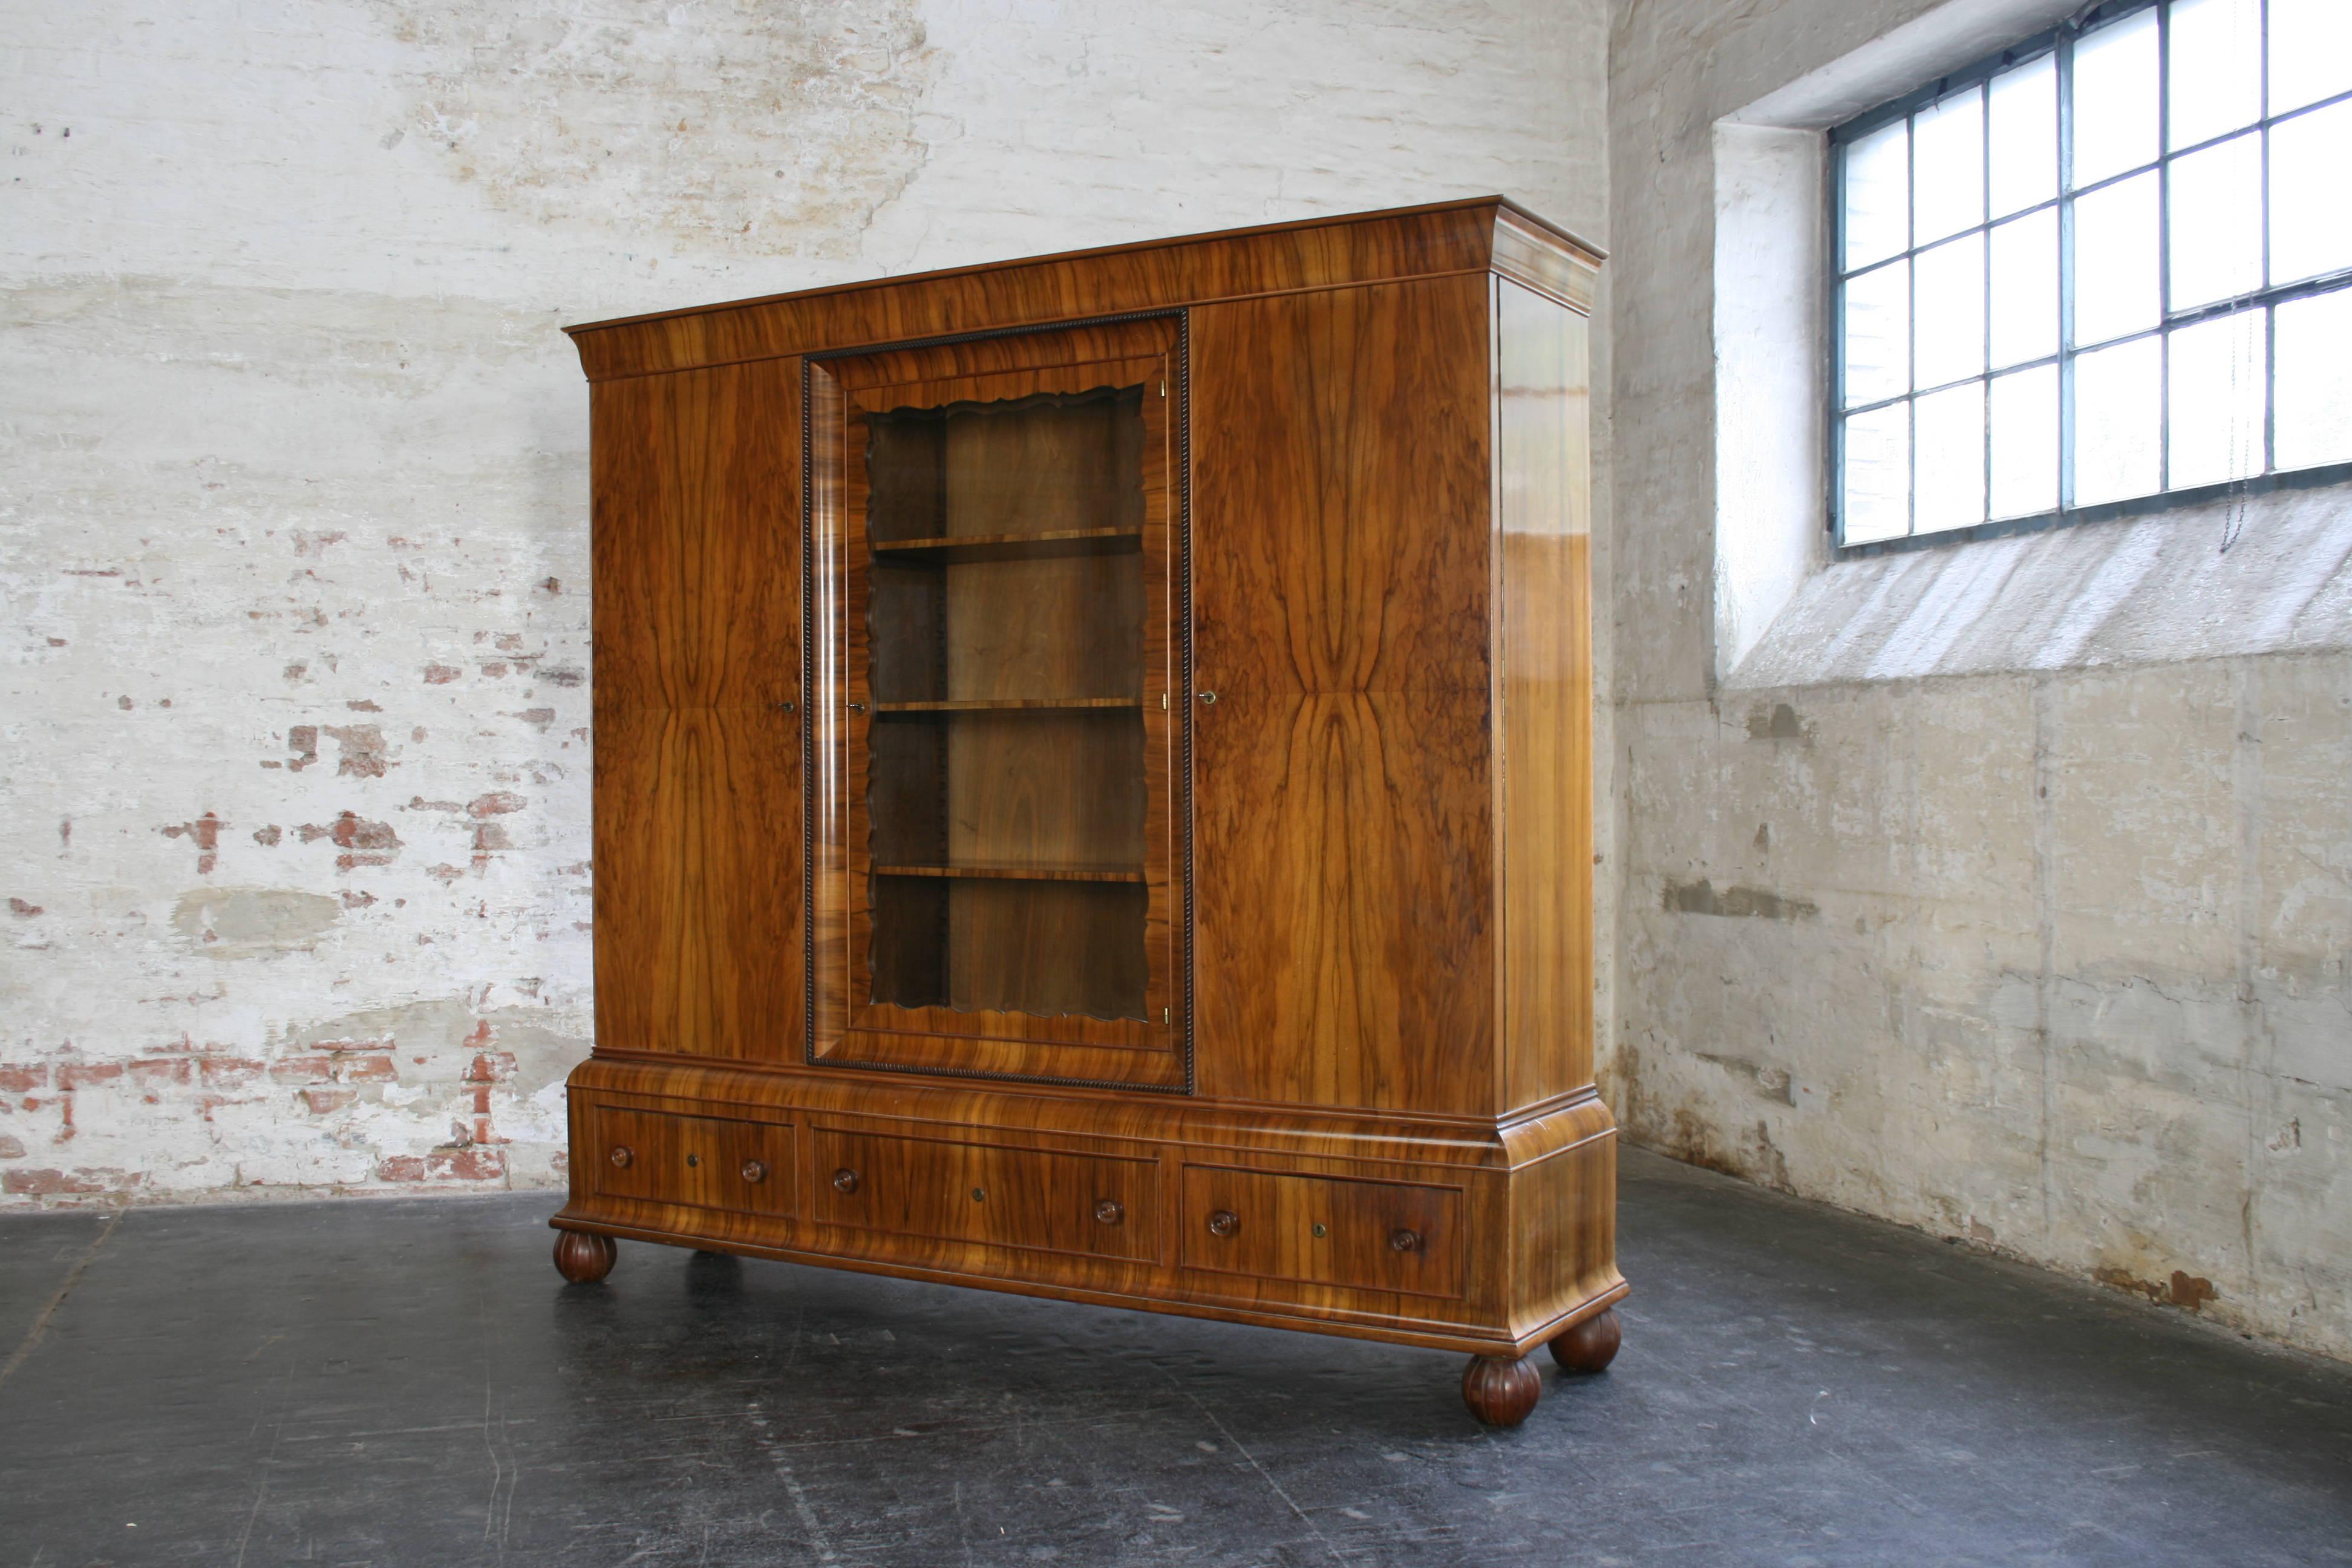 Impressive Art Deco cabinet in the manner of Otto Prutscher of Wiener Werkstätte with 2 sidedoors and a central display case with a transparent glass door showing discreet pattern of cut glass. The bottom section is structured with 3 drawers and the